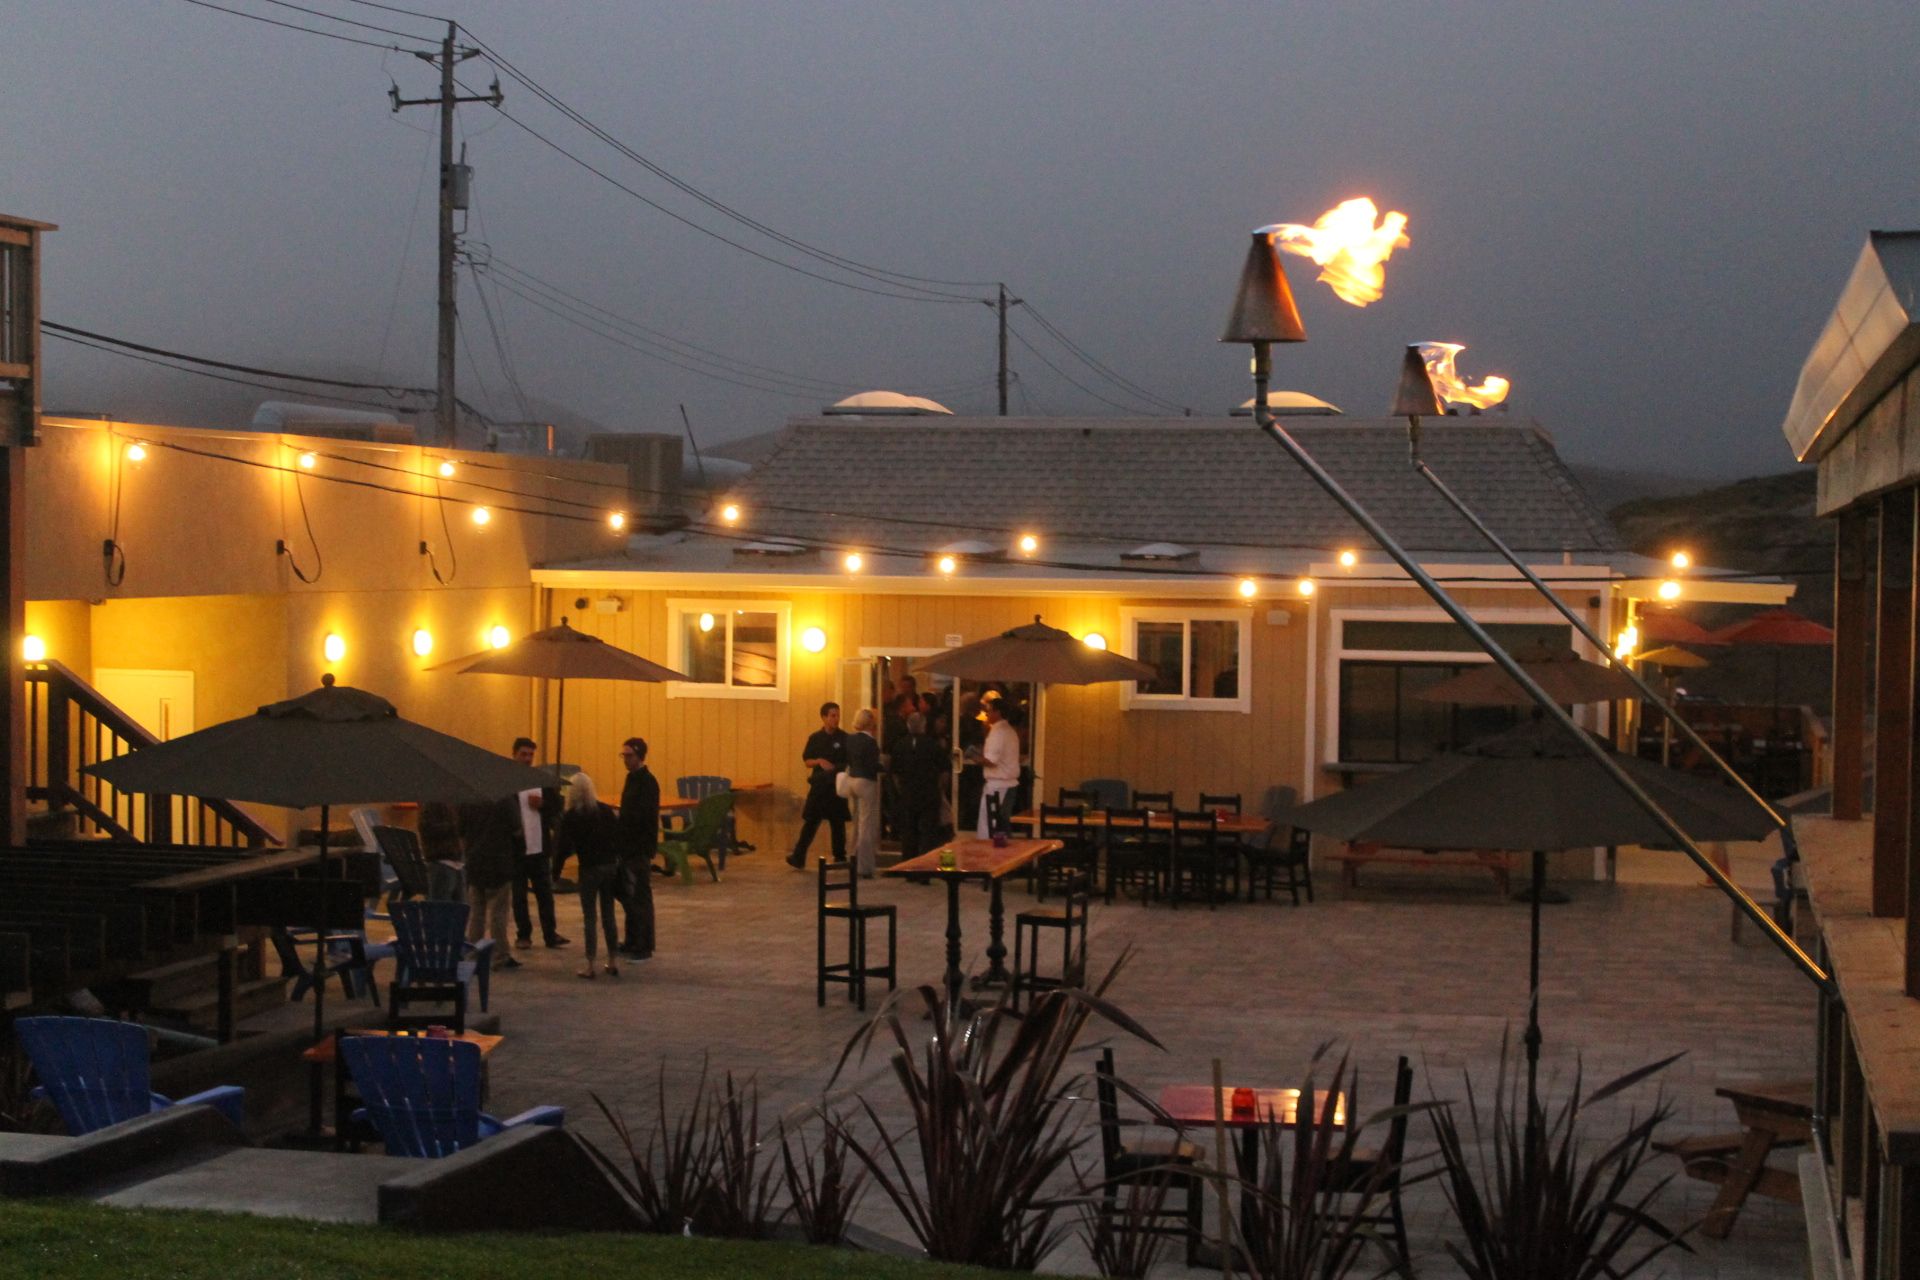 00_Surf_Spot_Patio_with_Torches.jpg